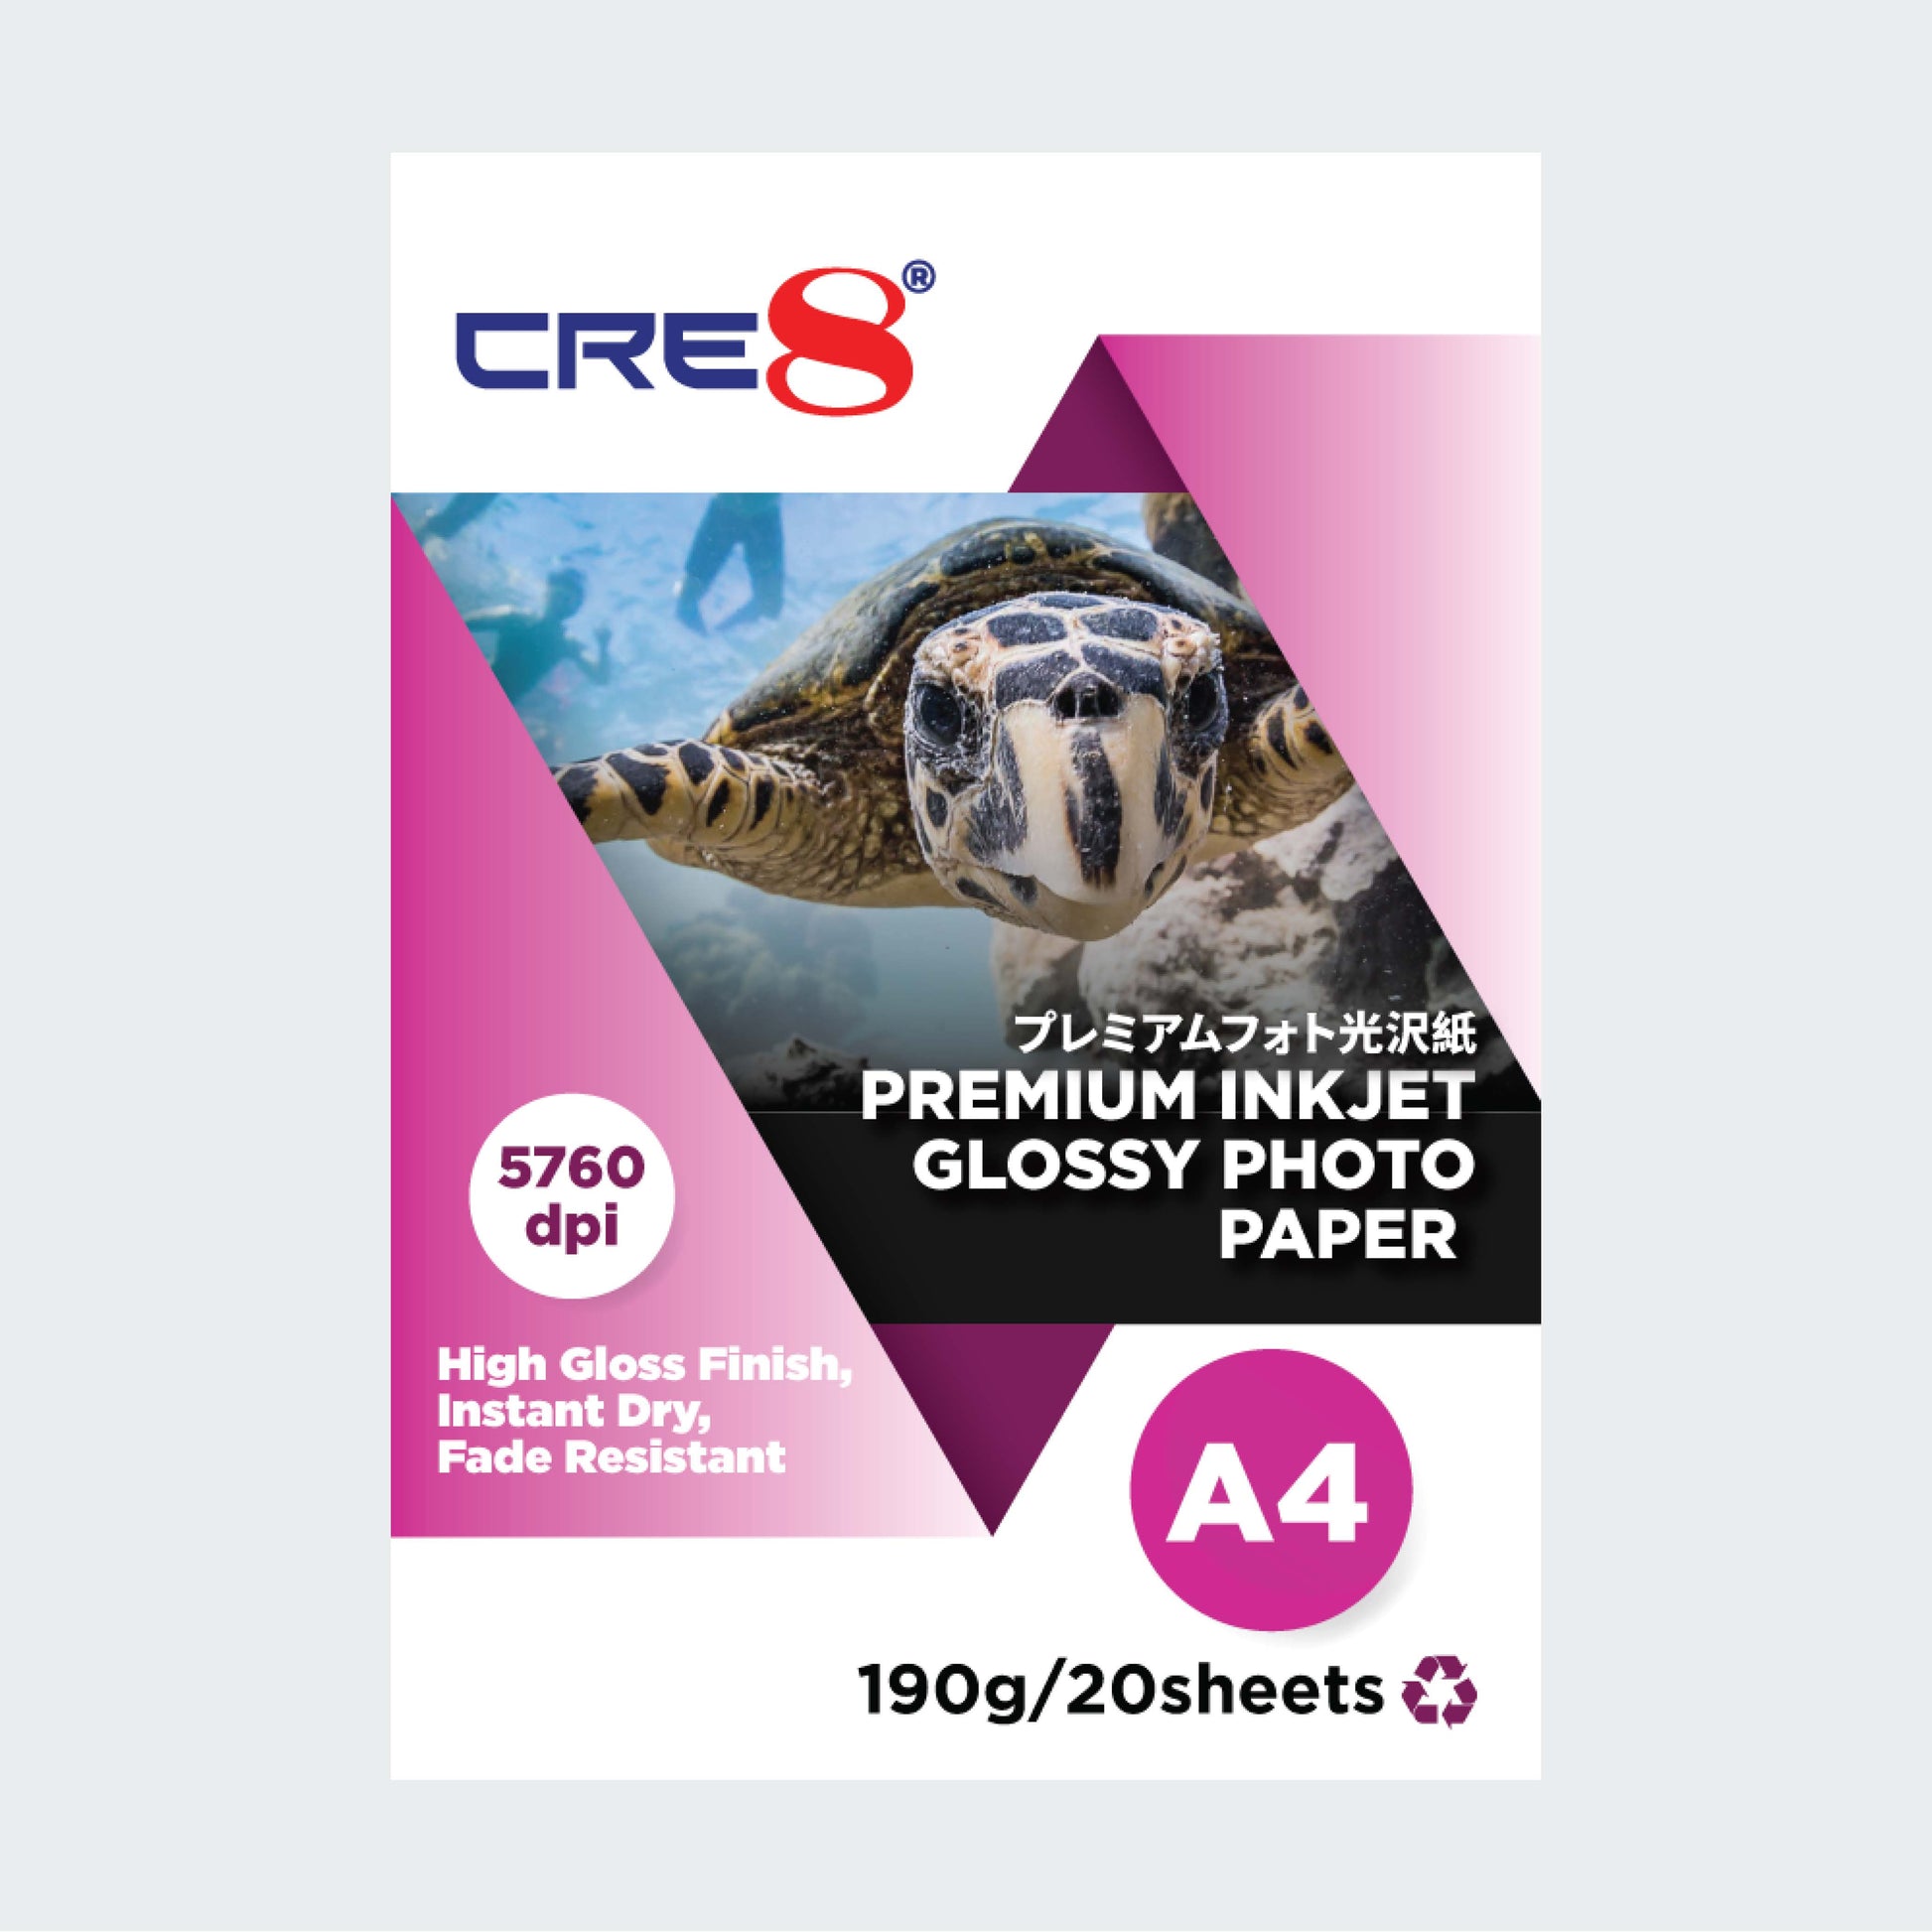 CRE8 | Premium Inkjet Glossy Photo Paper A4 190g / 20 sheets